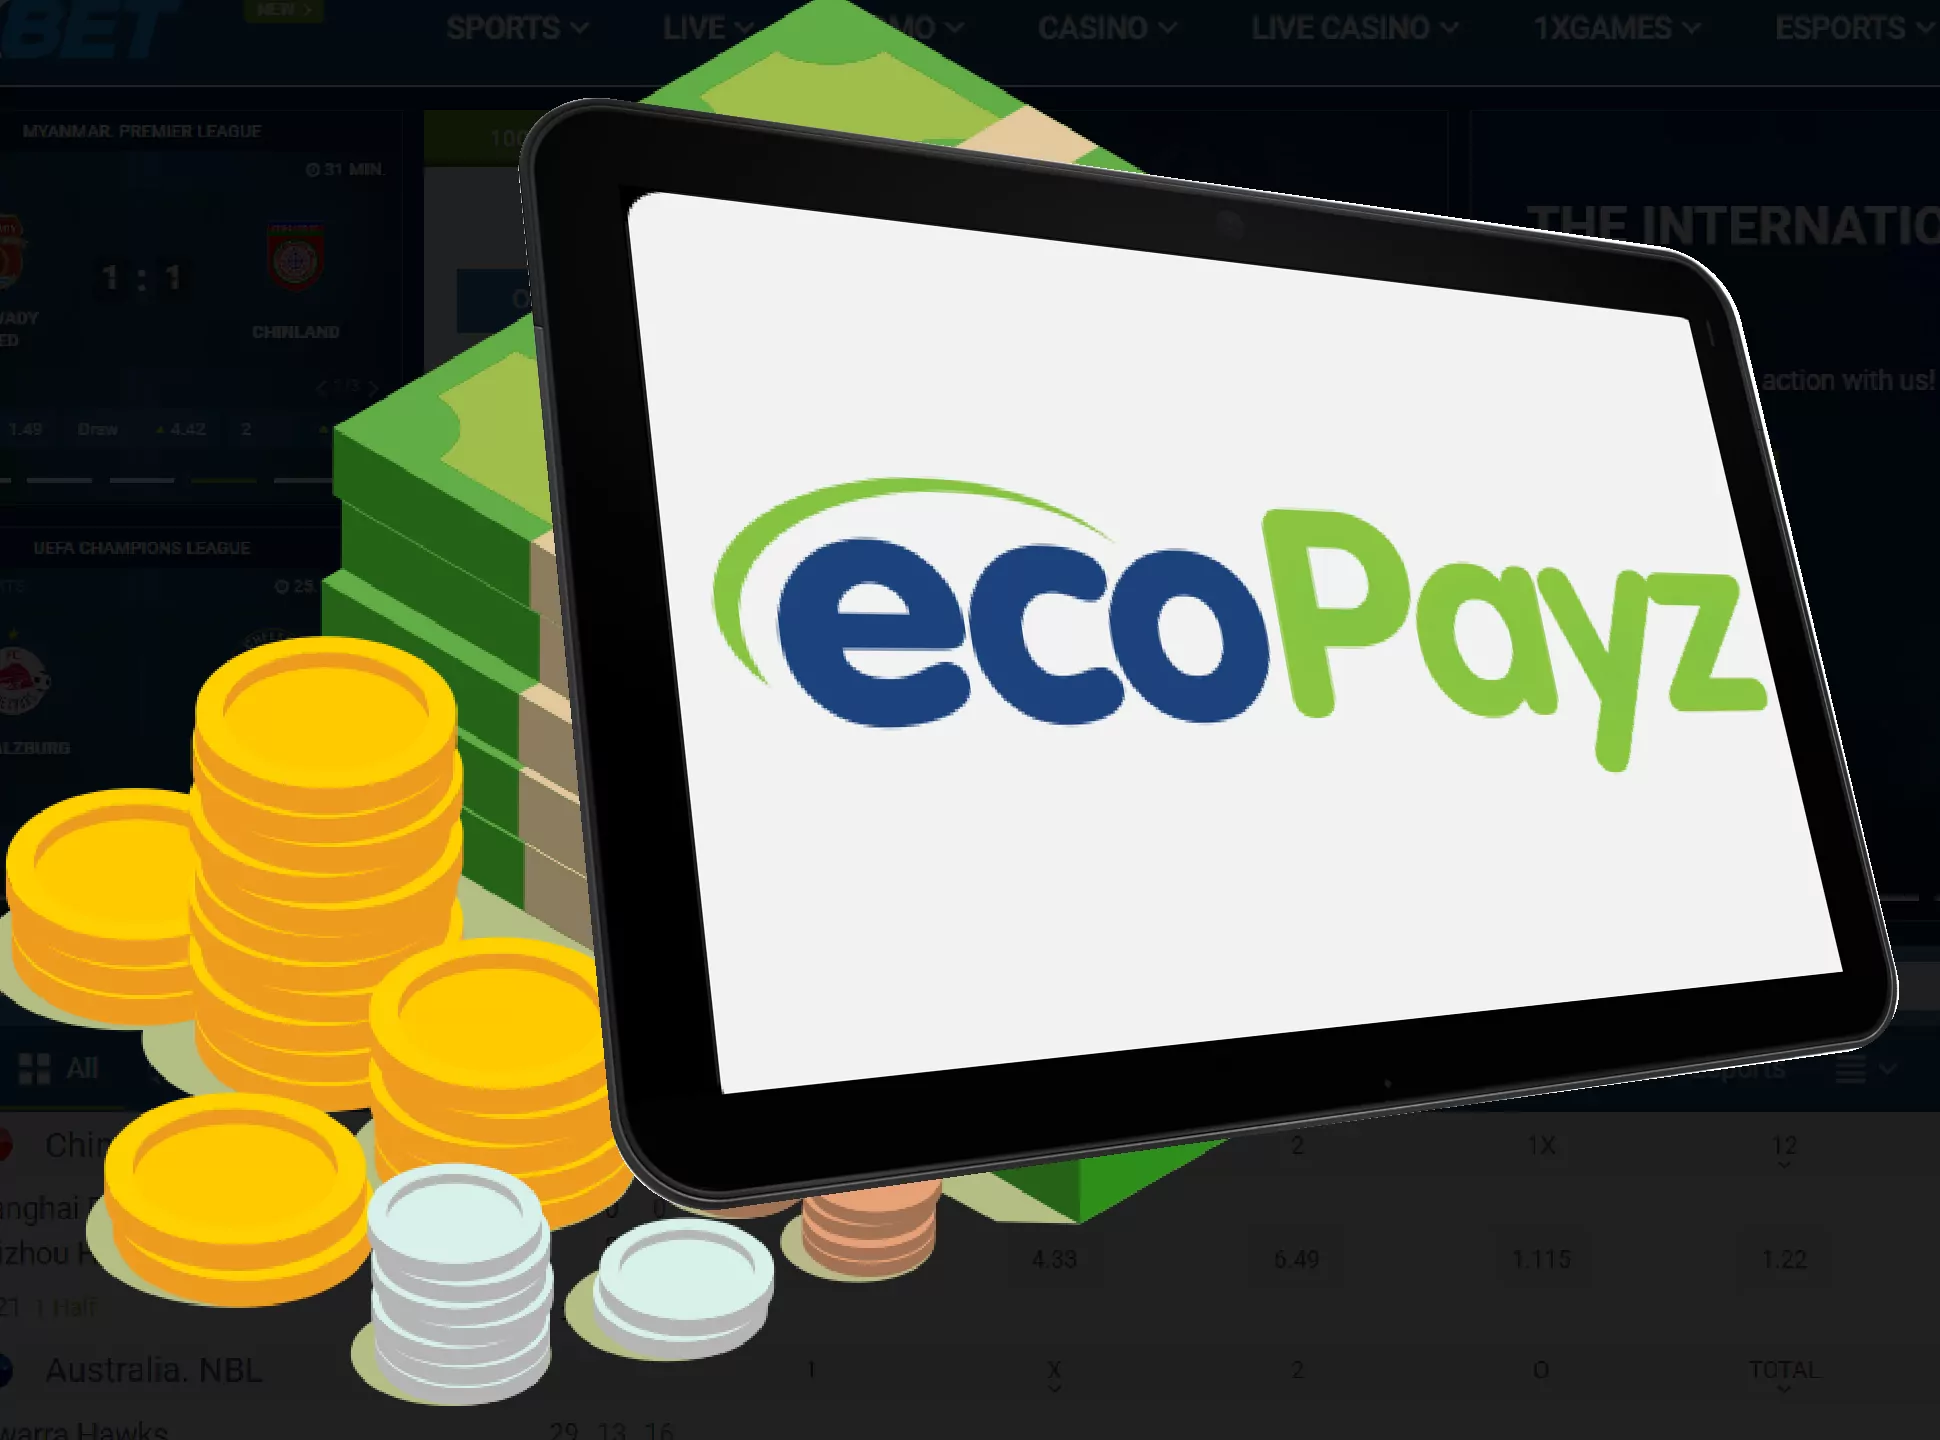 The ecoPayz payments can take up to 5 days.